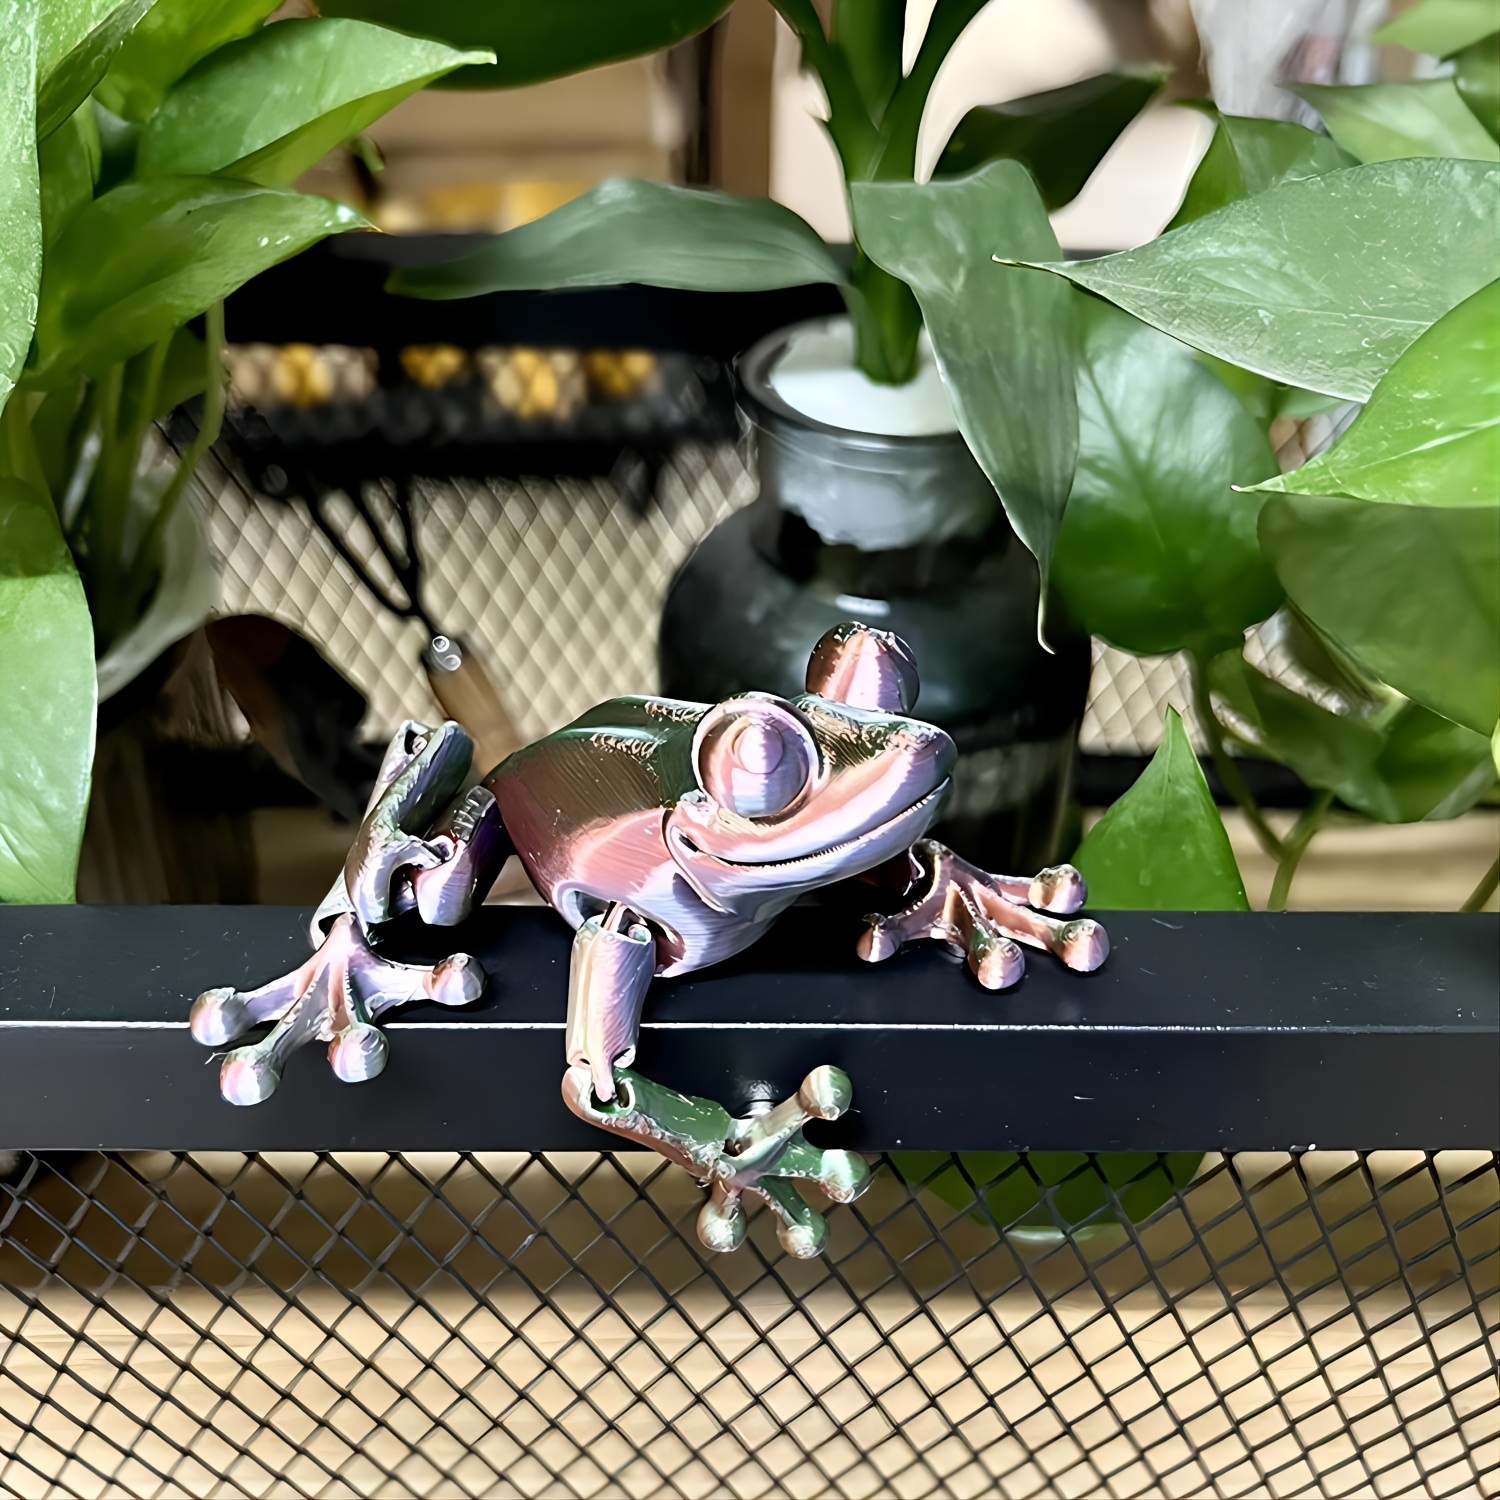 

Art Deco Animal Frog Statues With Posable Joints - 1pc Plastic Tabletop Sculpture Decor For Halloween, Christmas, Easter, Thanksgiving, Valentine's Day - Festive Home Decoration